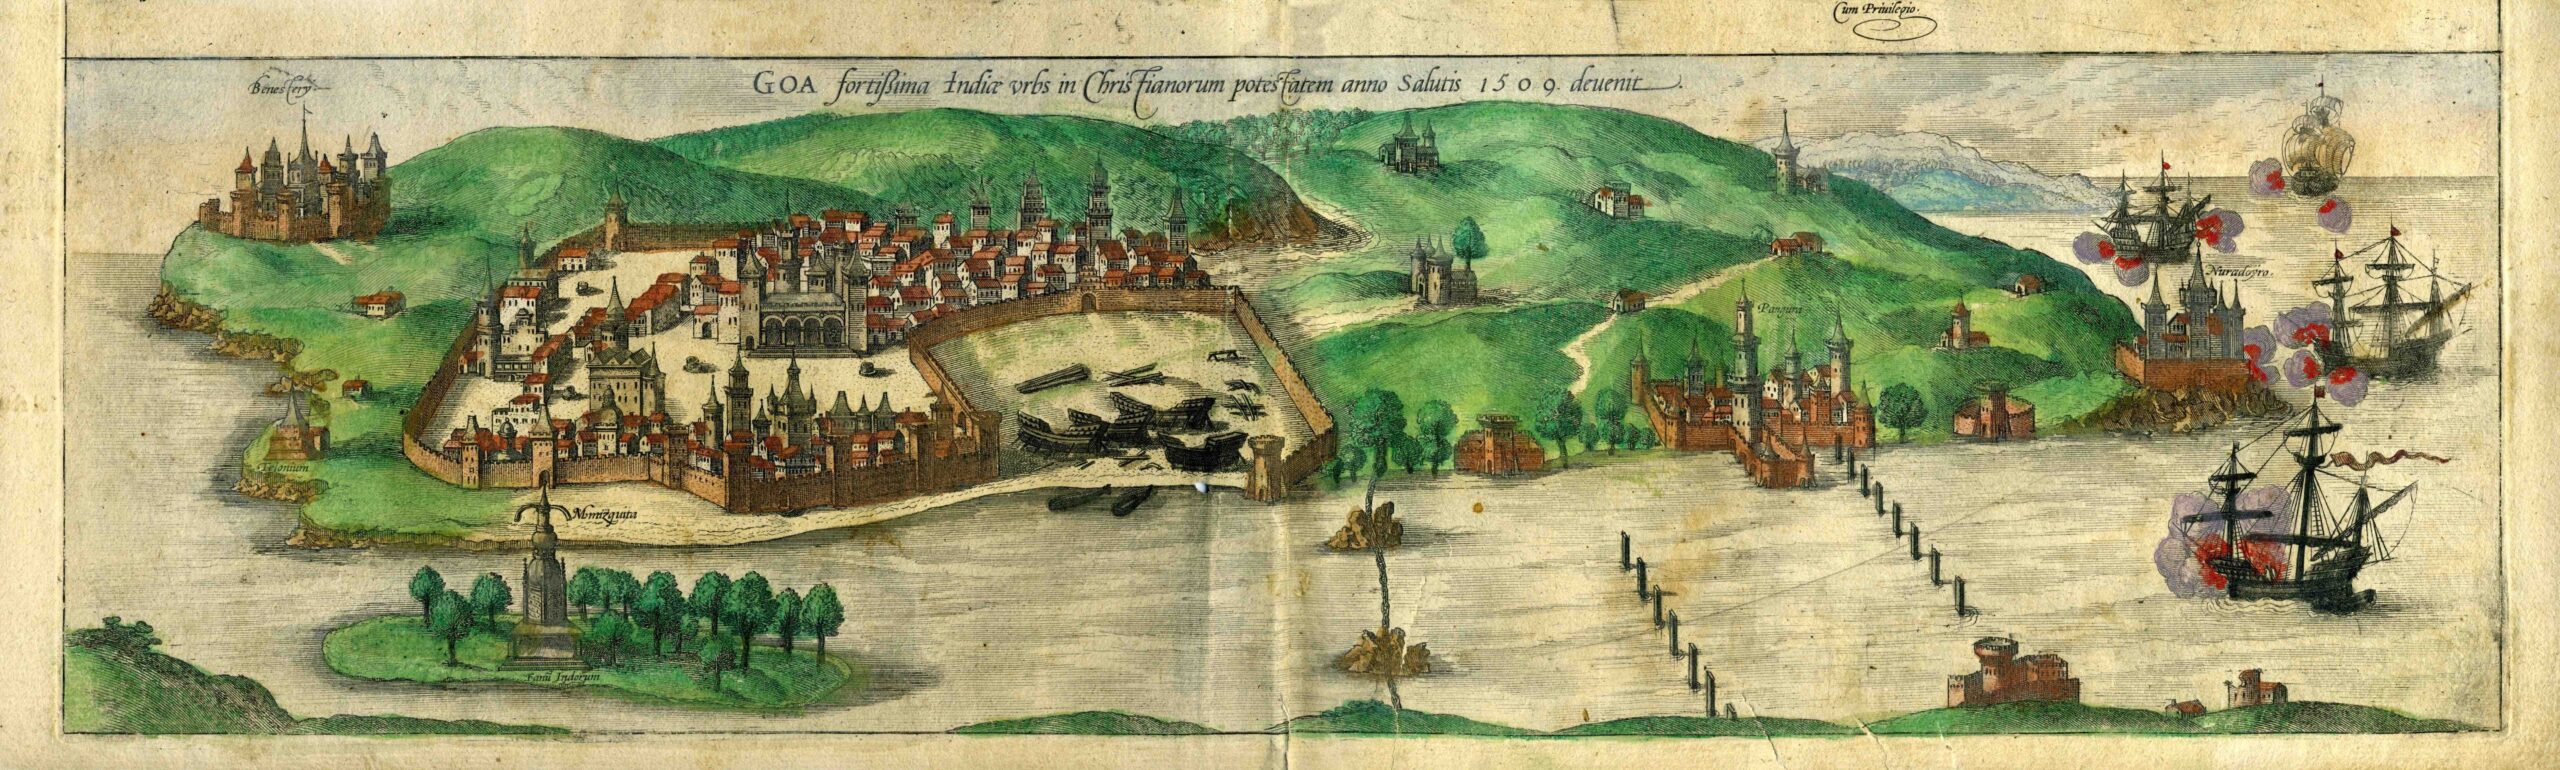 The City of Goa in 1572.